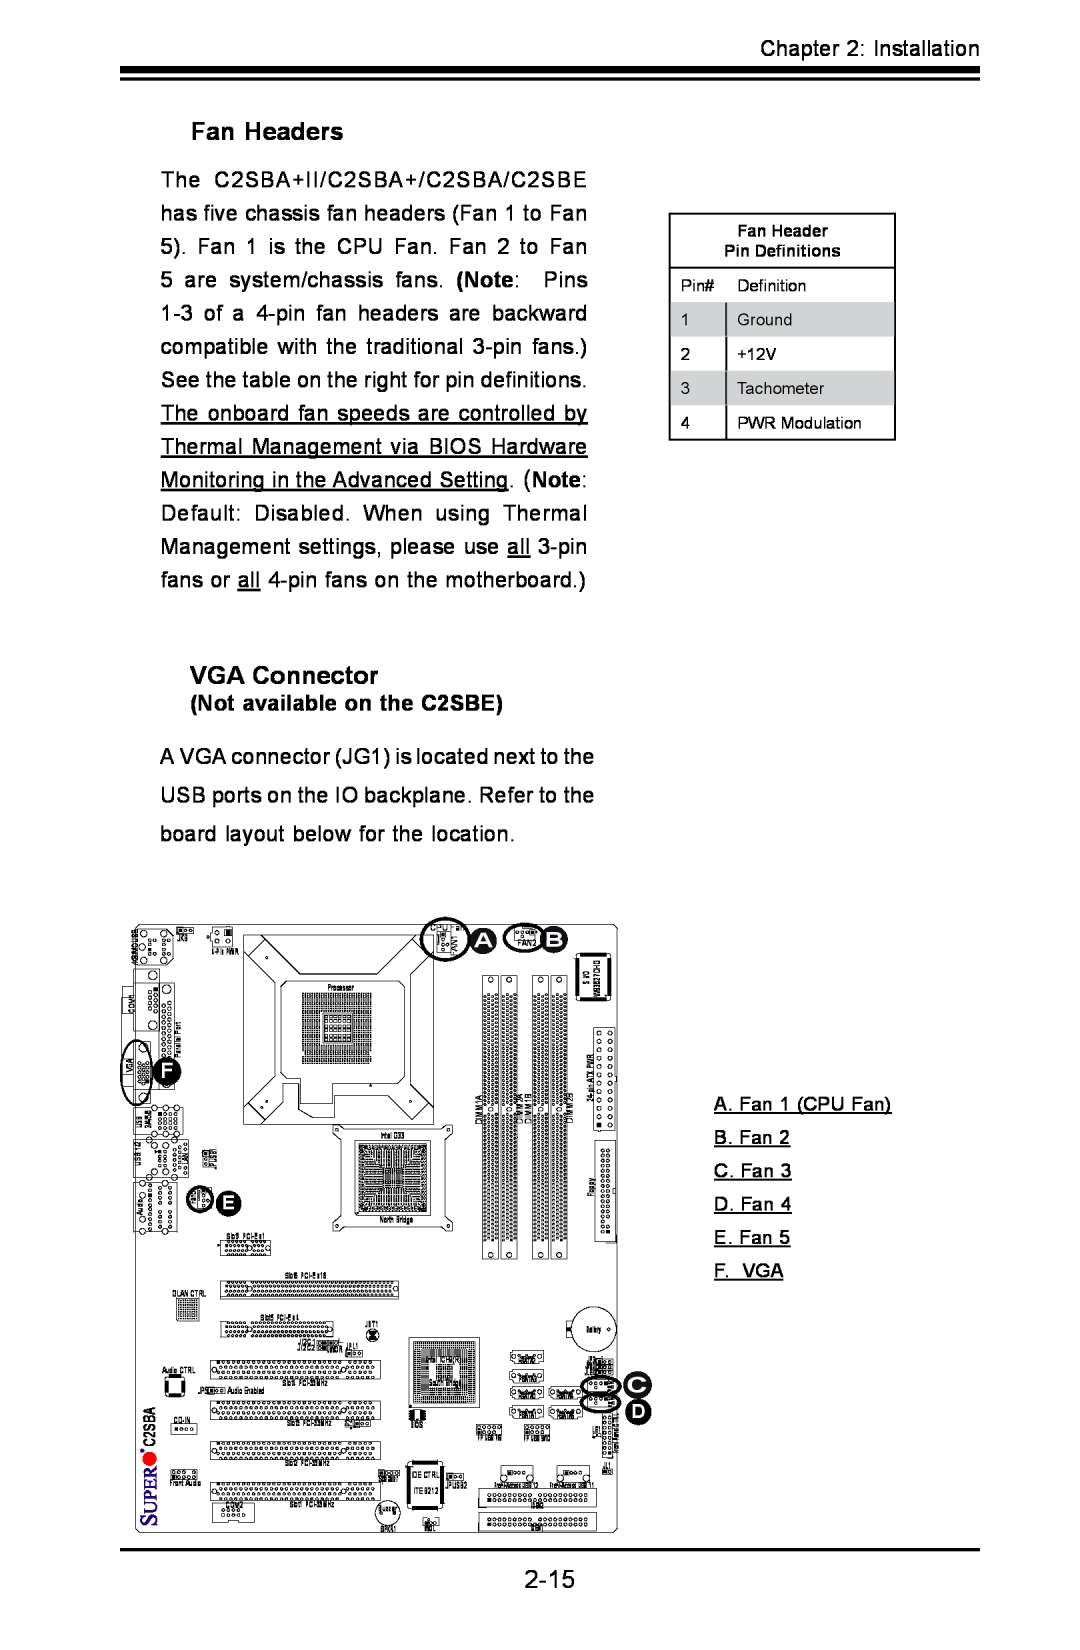 SUPER MICRO Computer C2SBA+II user manual Fan Headers, VGA Connector, Not available on the C2SBE 